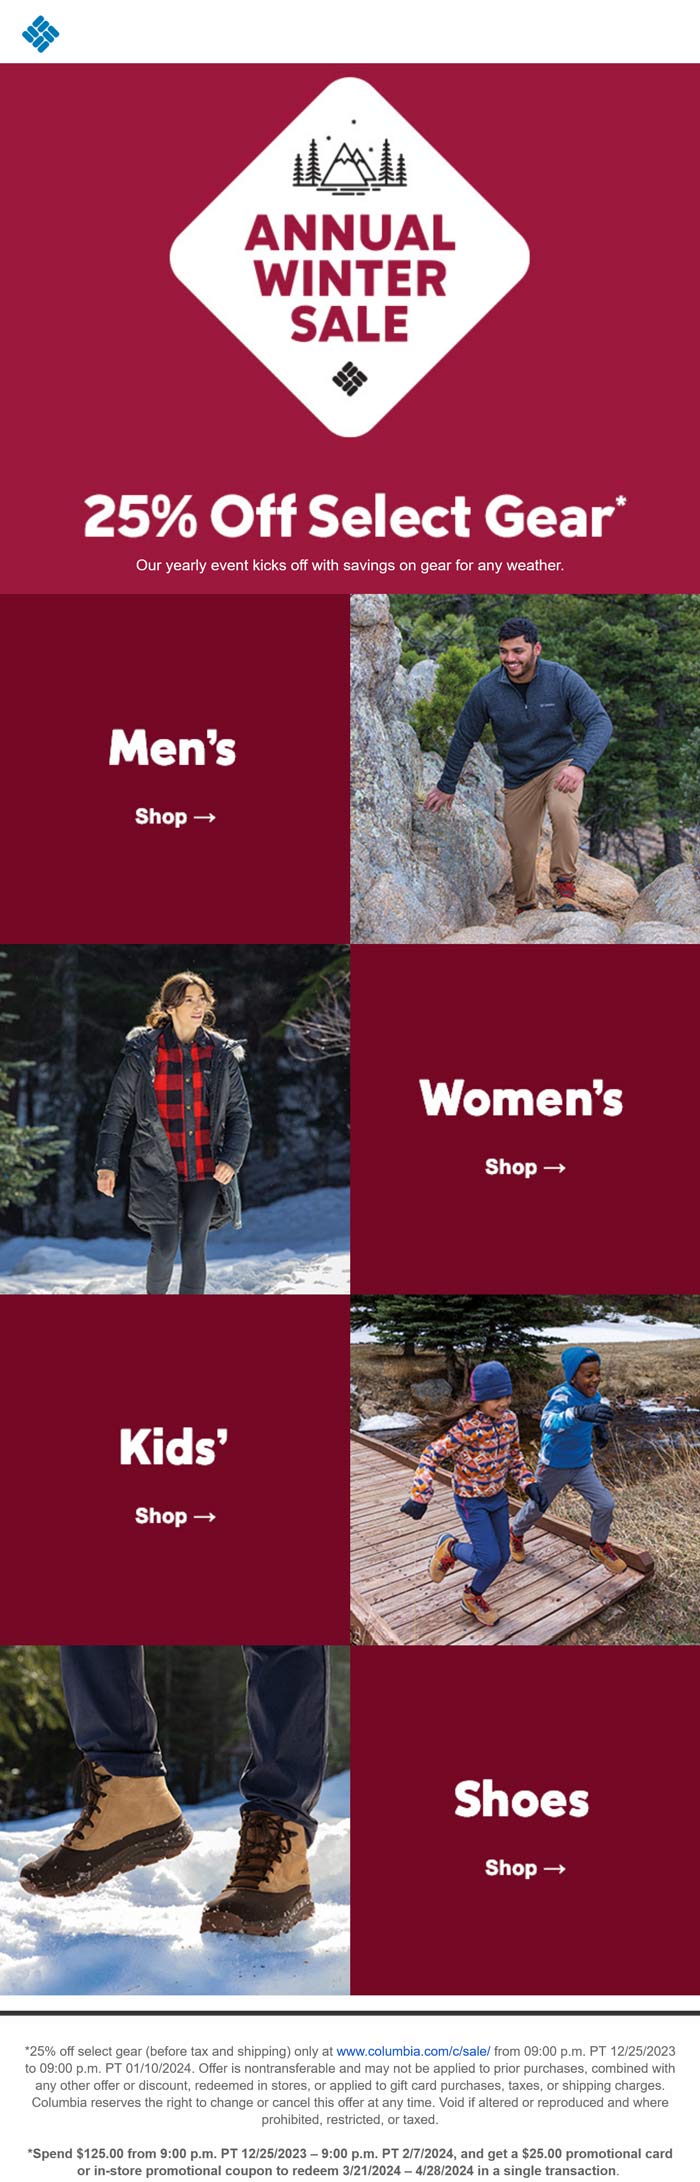 Columbia stores Coupon  25% off various gear + $25 card on $125 spent online at Columbia #columbia 